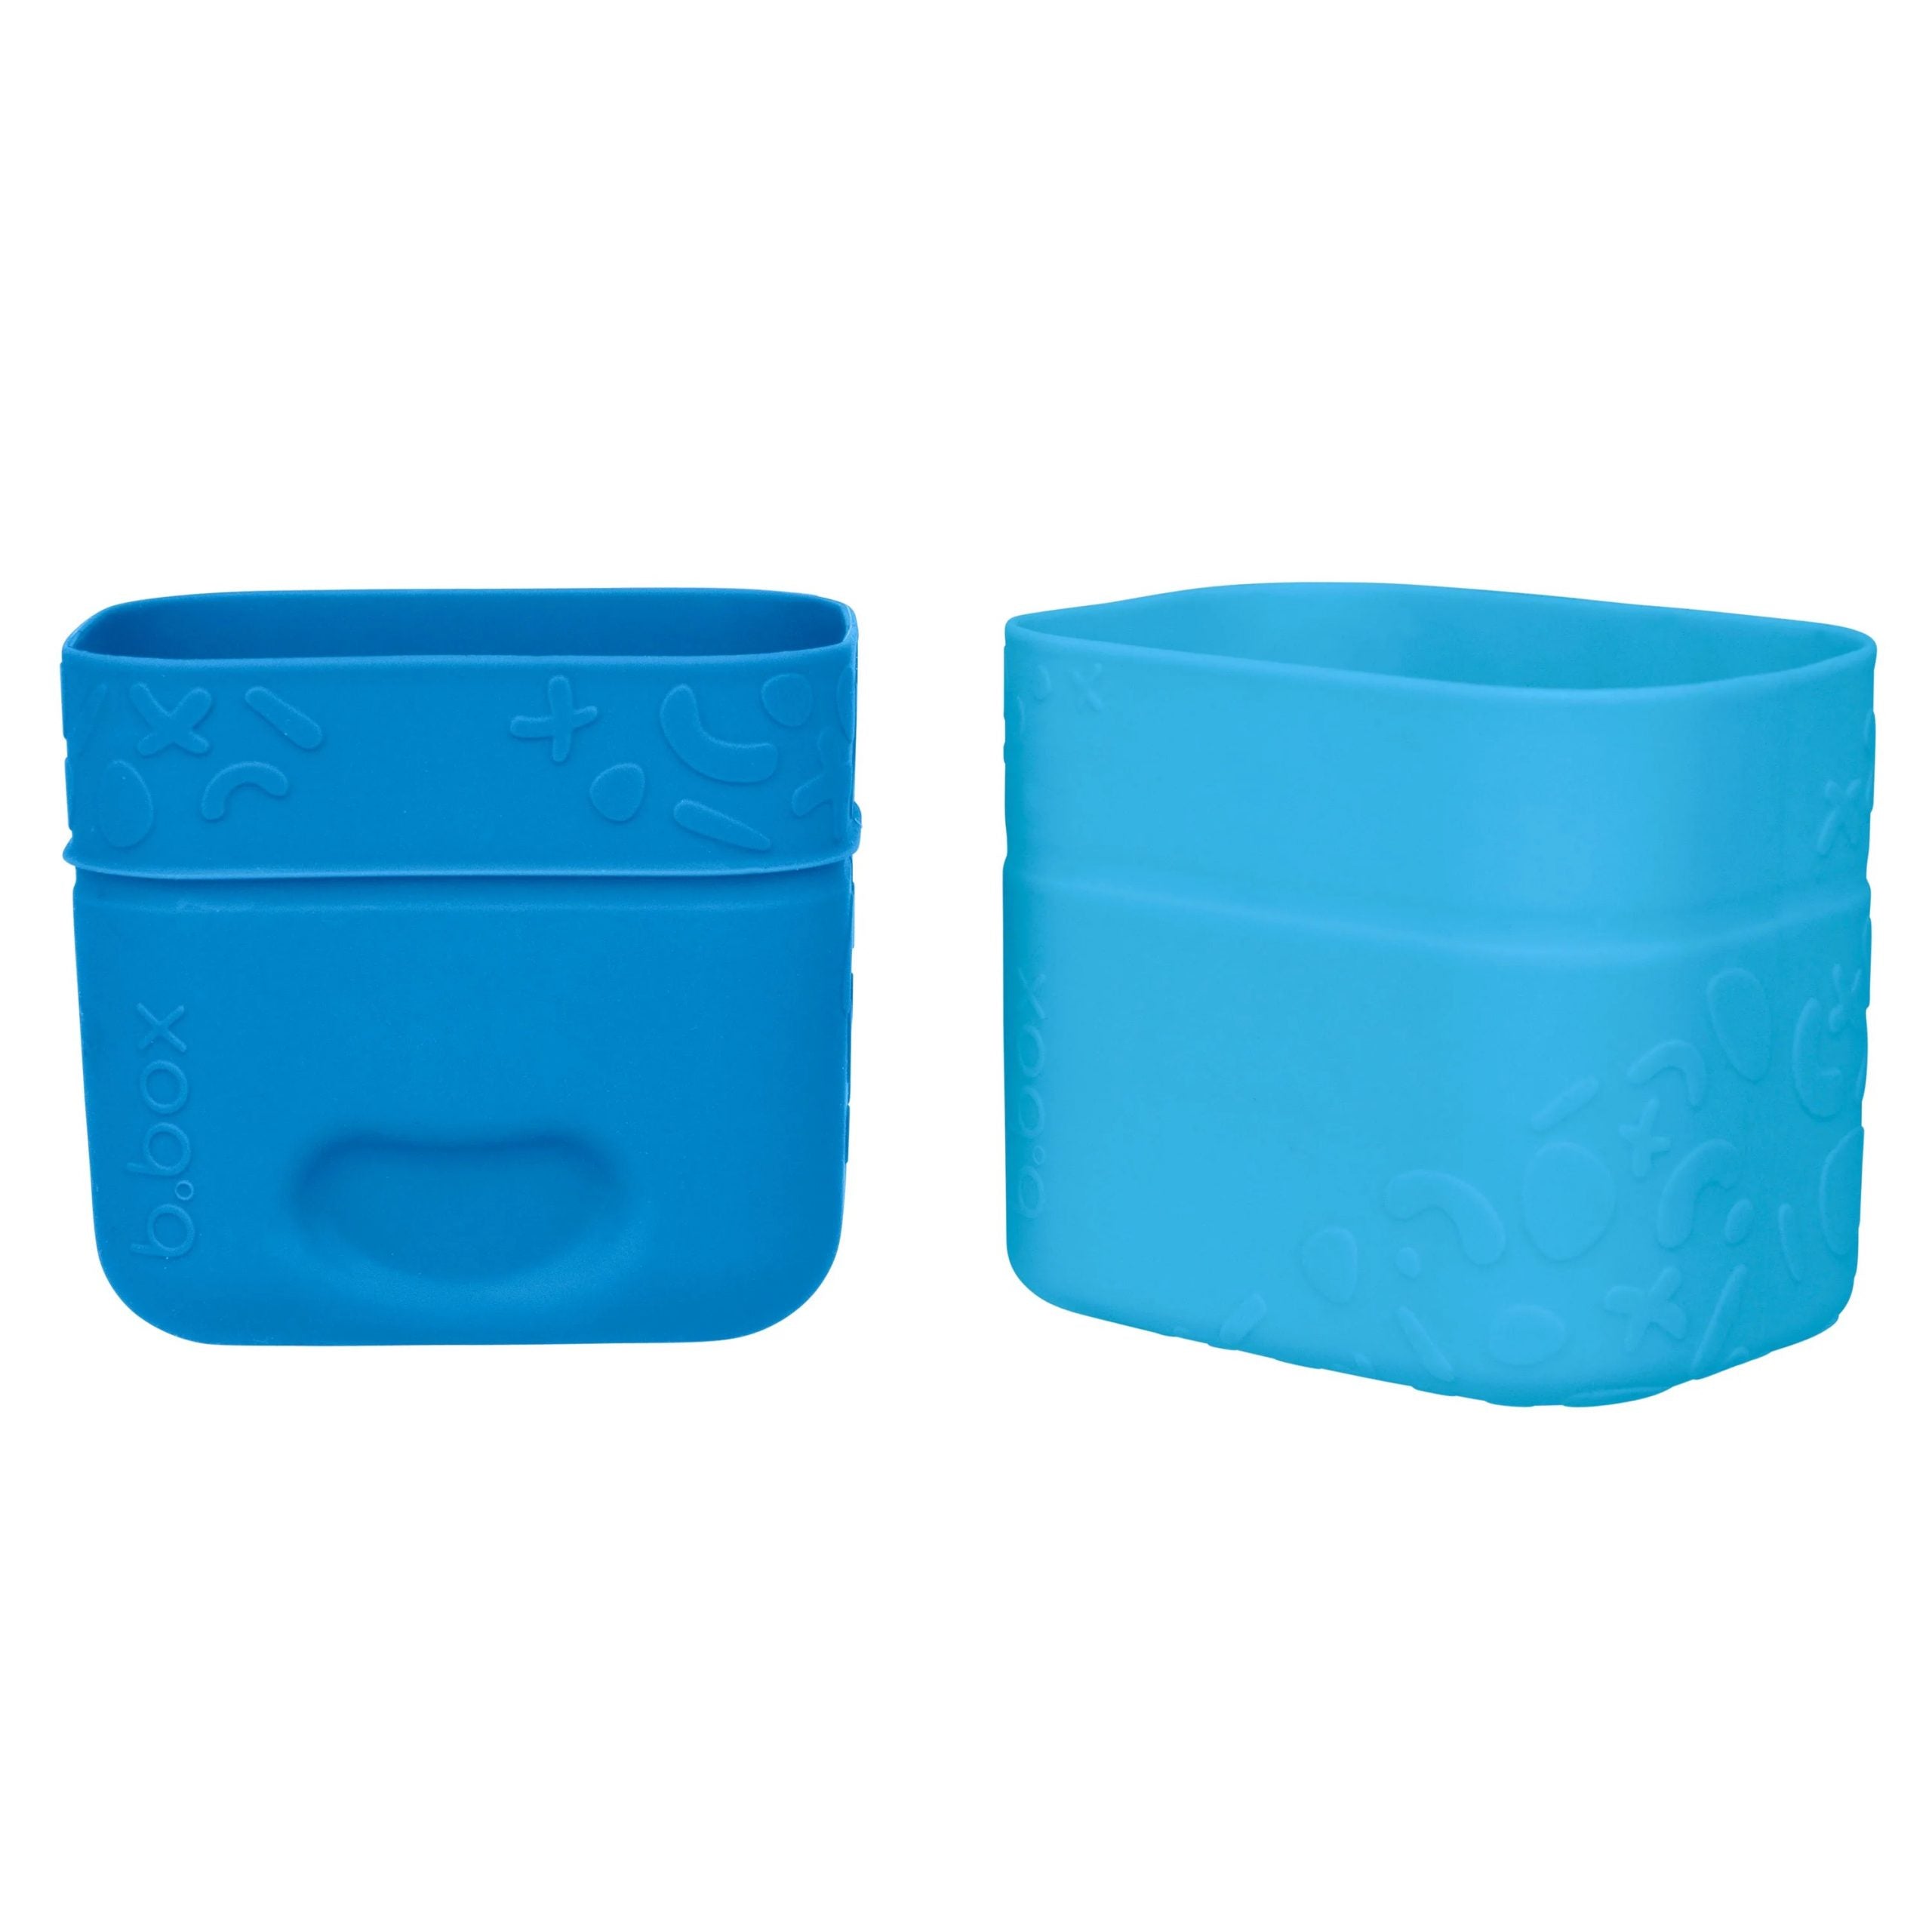 b.box silicone snack cup ocean